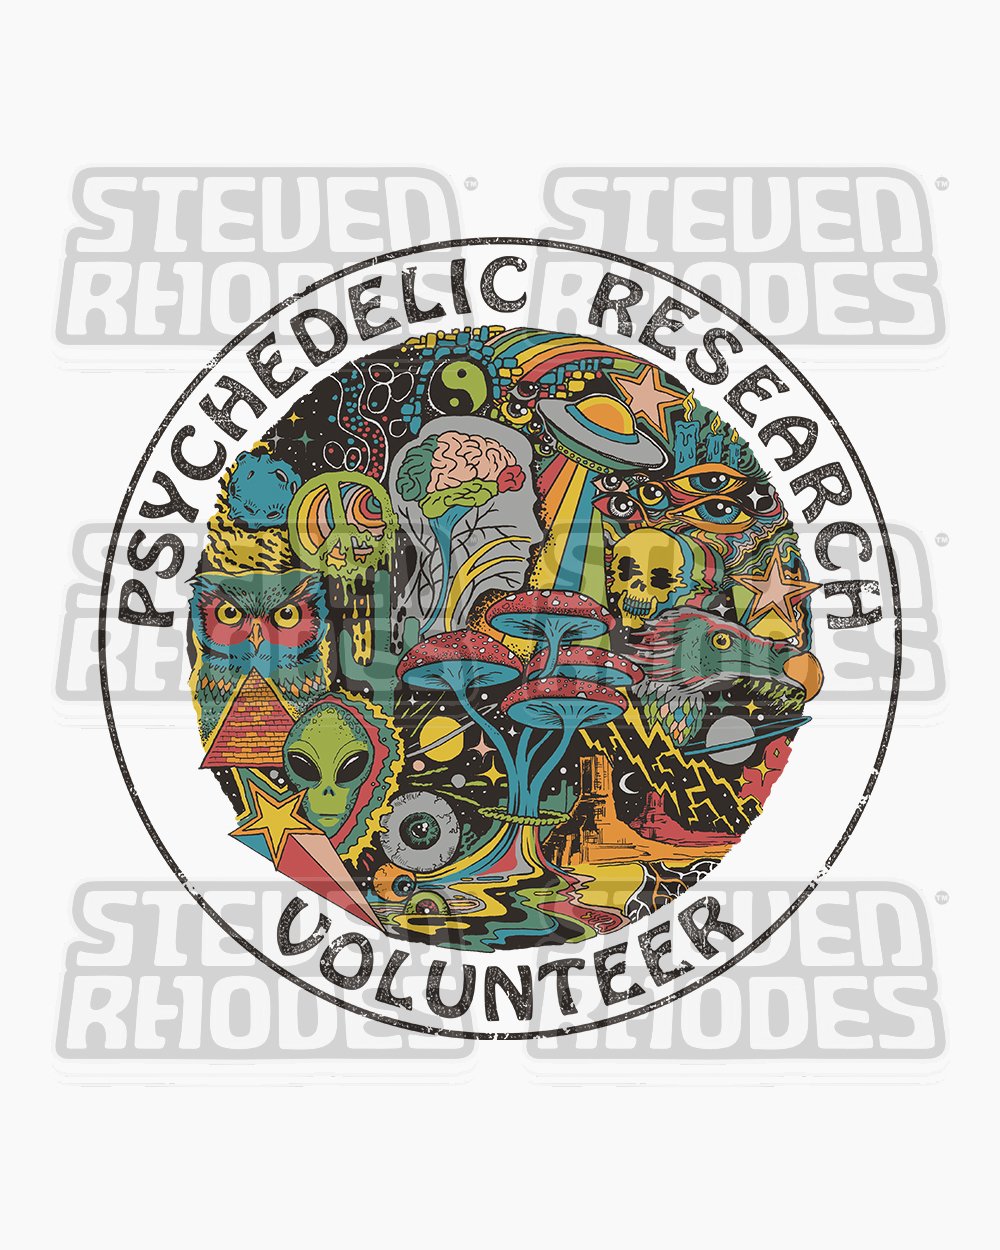 Psychedelic Research Volunteer Tank Australia Online #colour_white